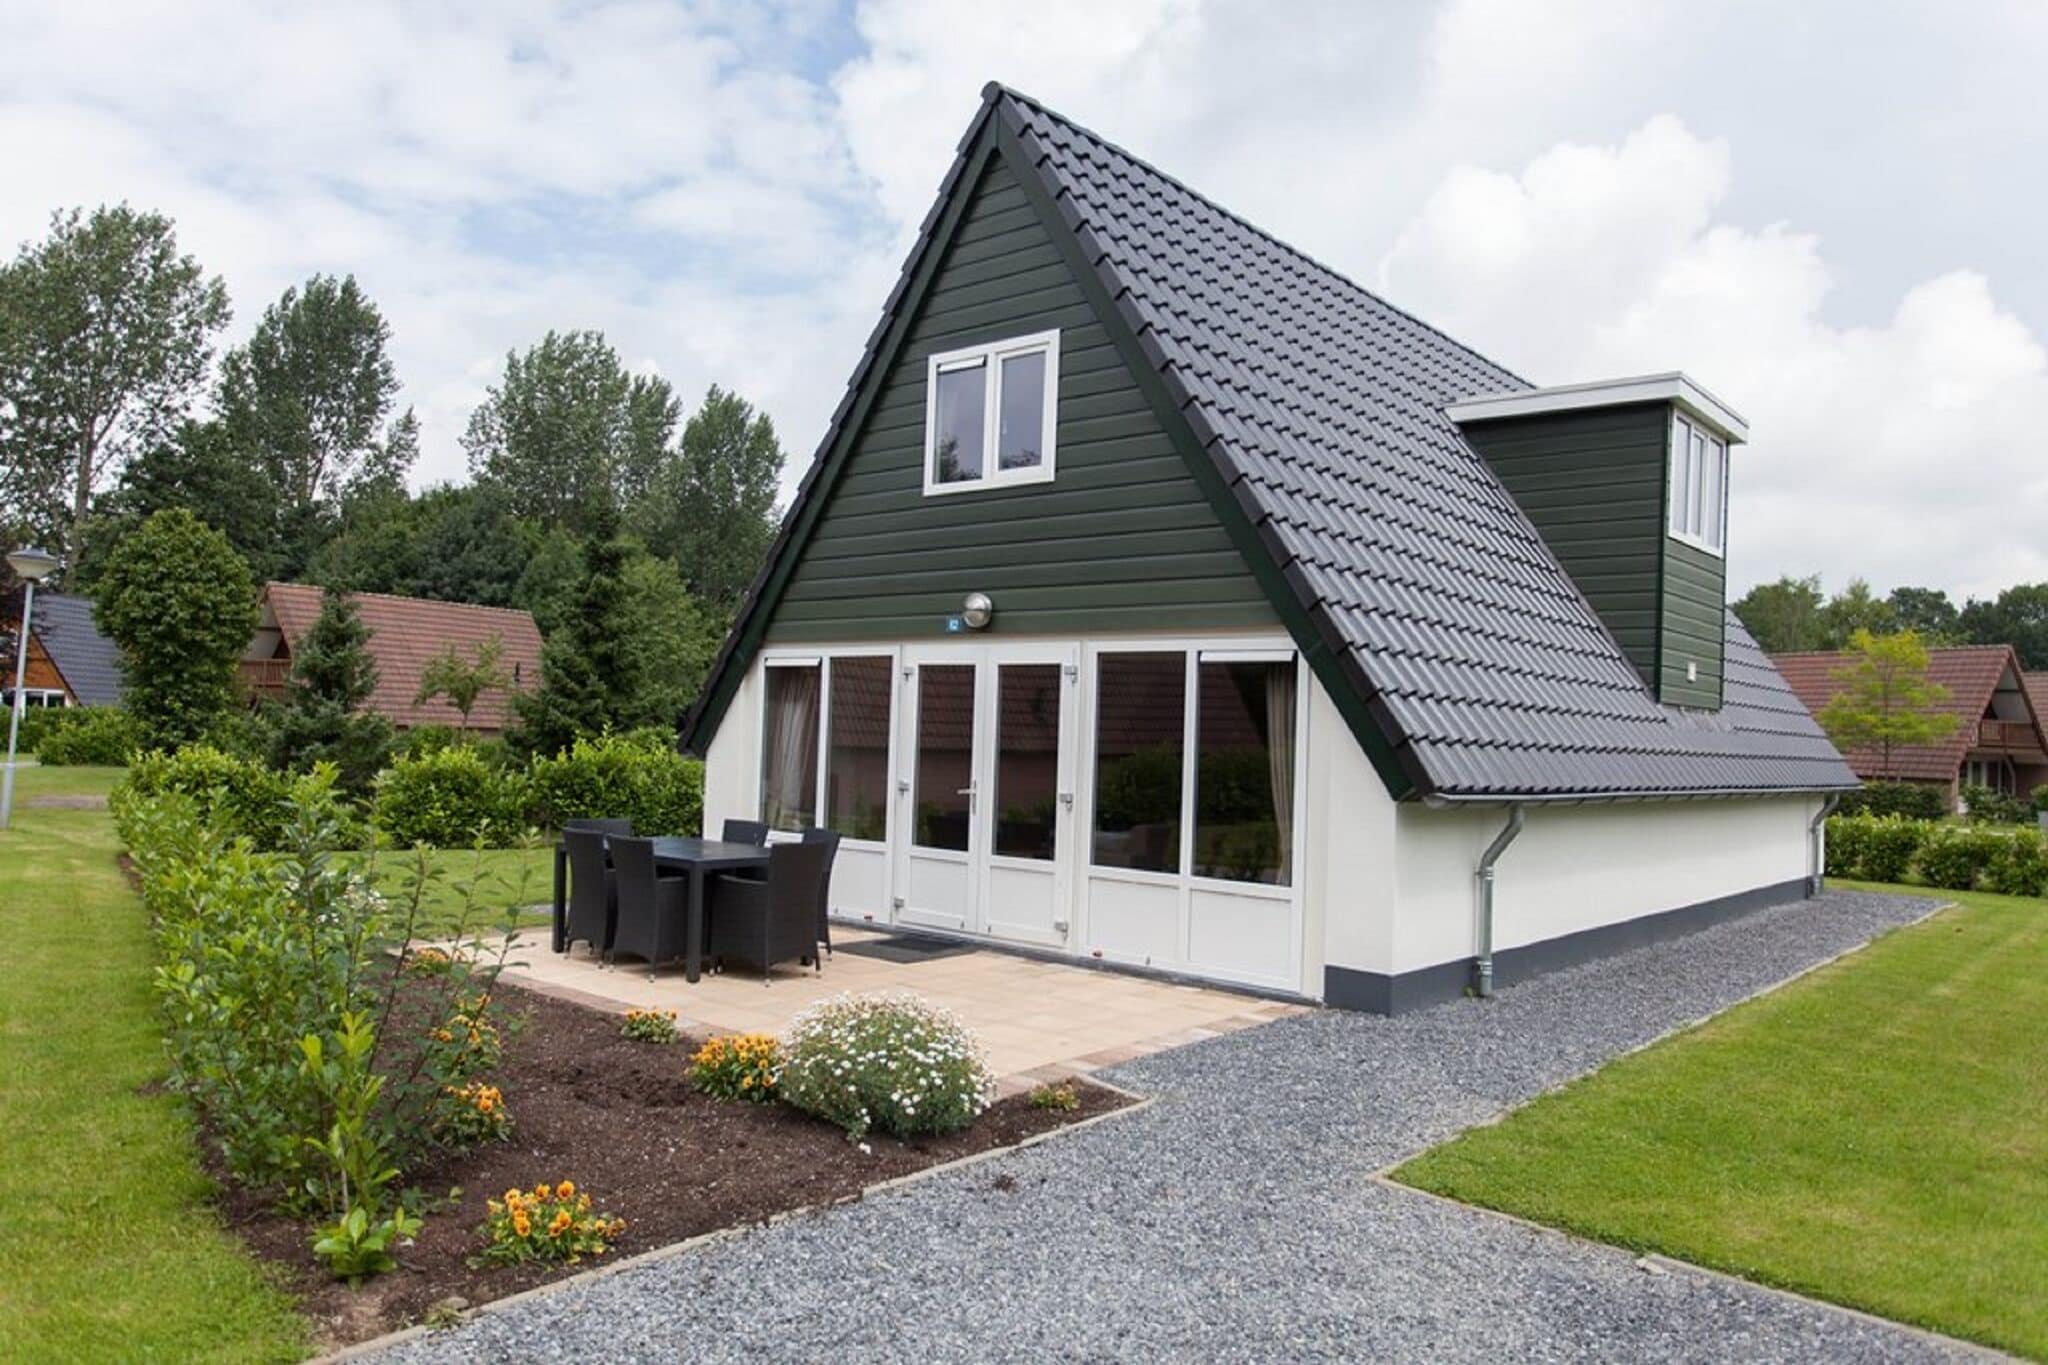 Nice bungalow in a holiday park near Maastricht